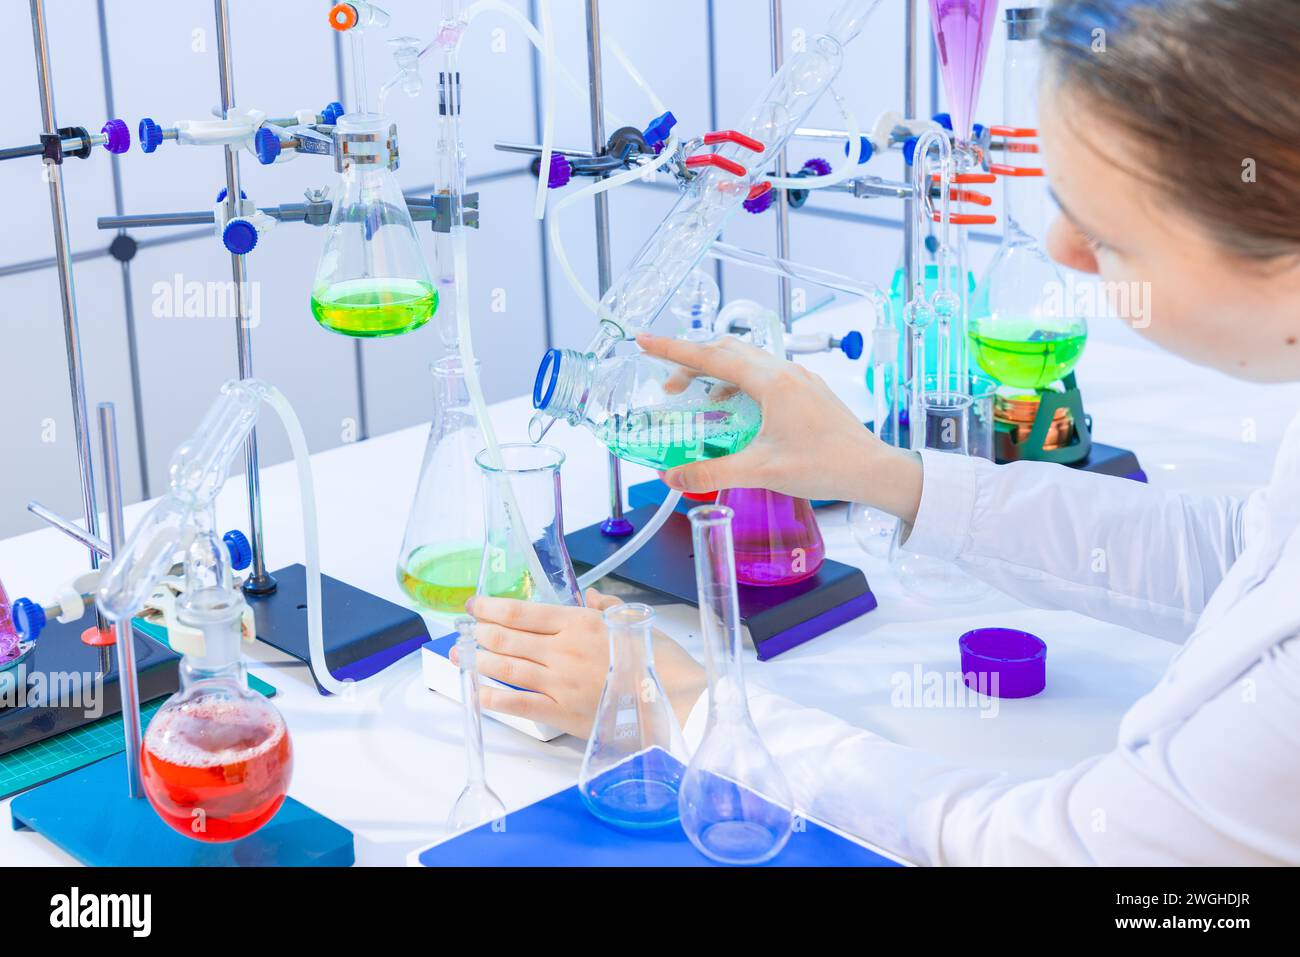 Female Scientist Conducting Medical Research in Laboratory Stock Photo